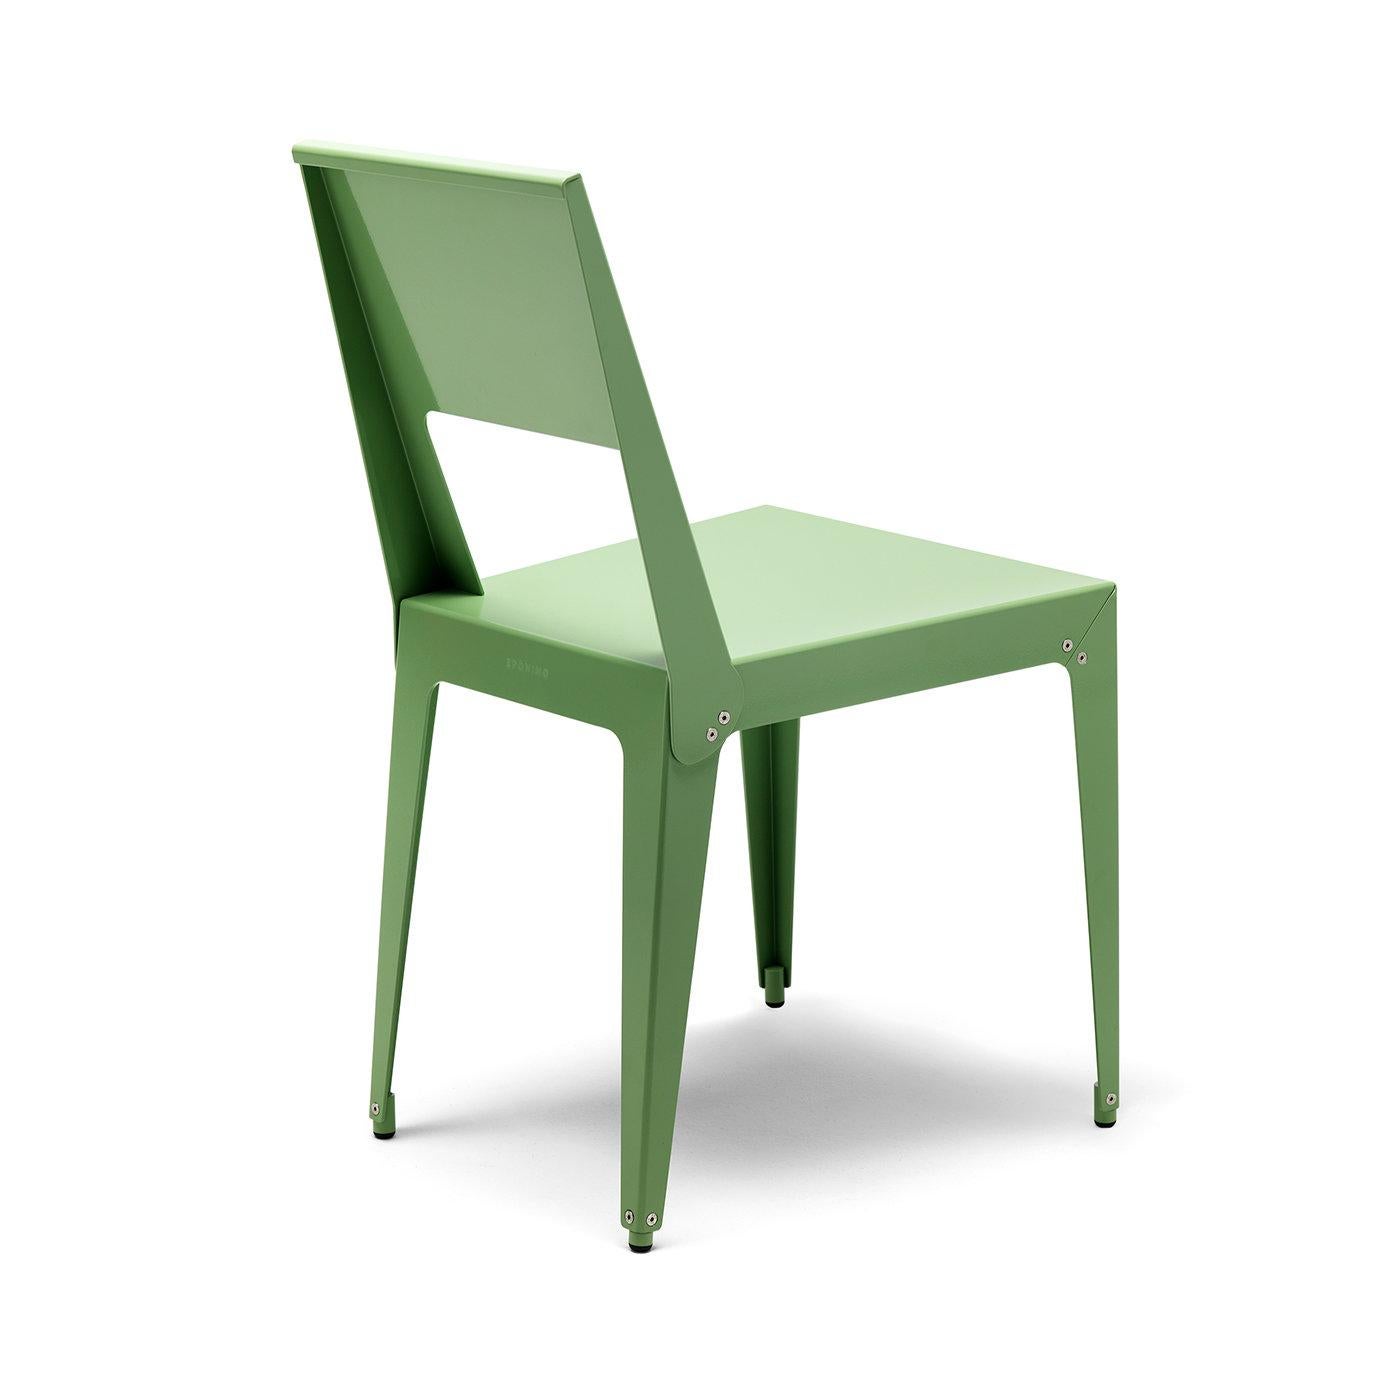 Simple yet bold, this chair is characterized by clean lines and a pale green color with a semi-glossy, powder-coated finish with a silhouette inspired by the archetypal form reinterpreted using innovative technology. Made of aluminum, the body is